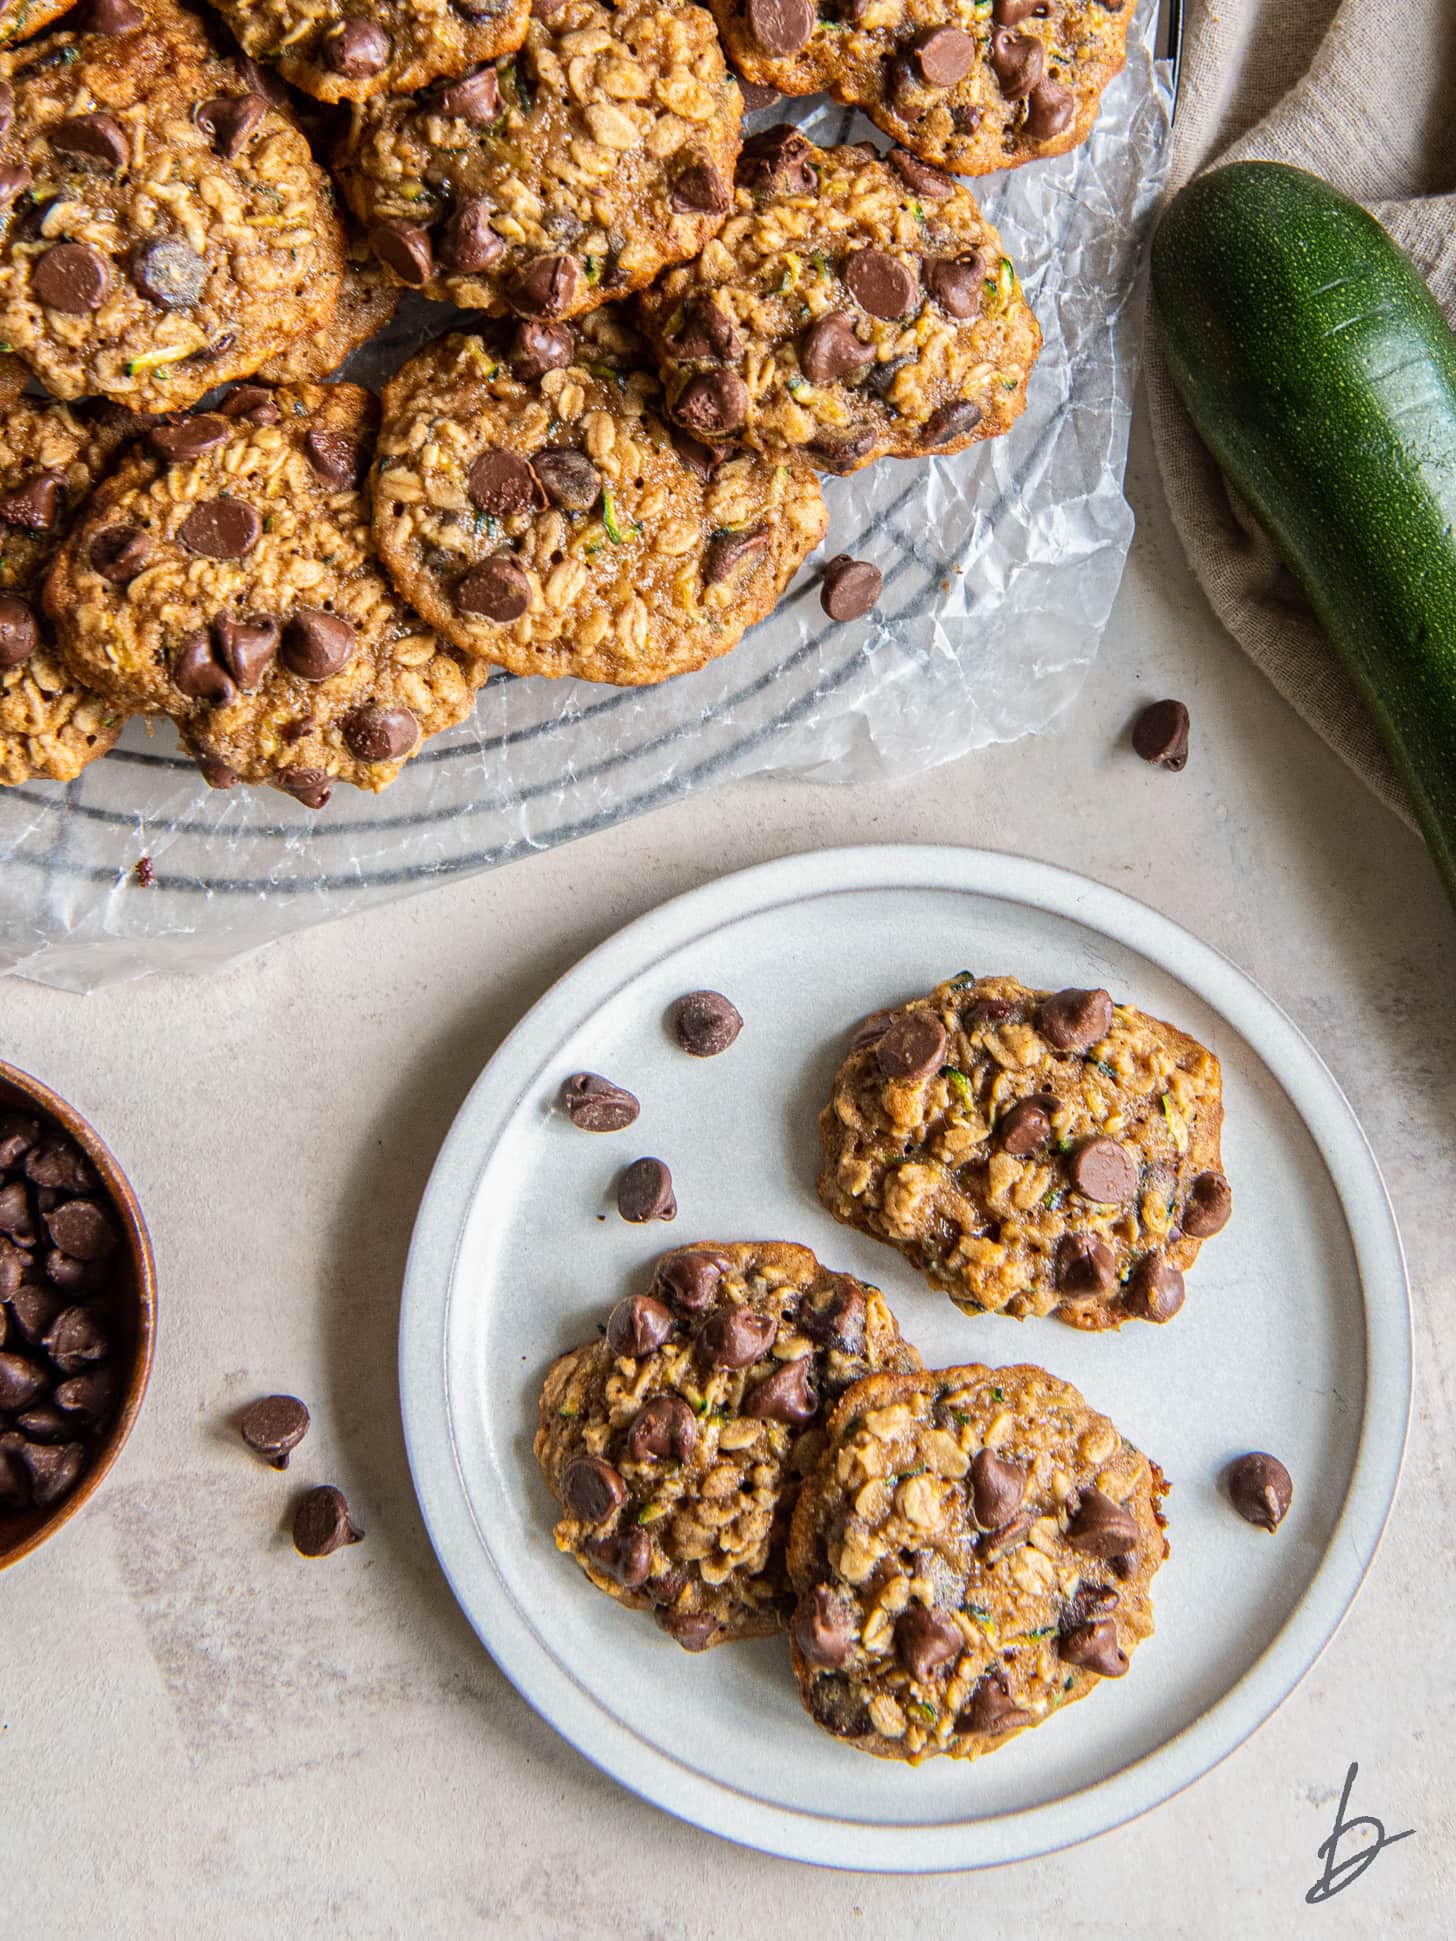 chocolate chip zucchini cookies on a plate next to a zucchini and more cookies on a wire rack.